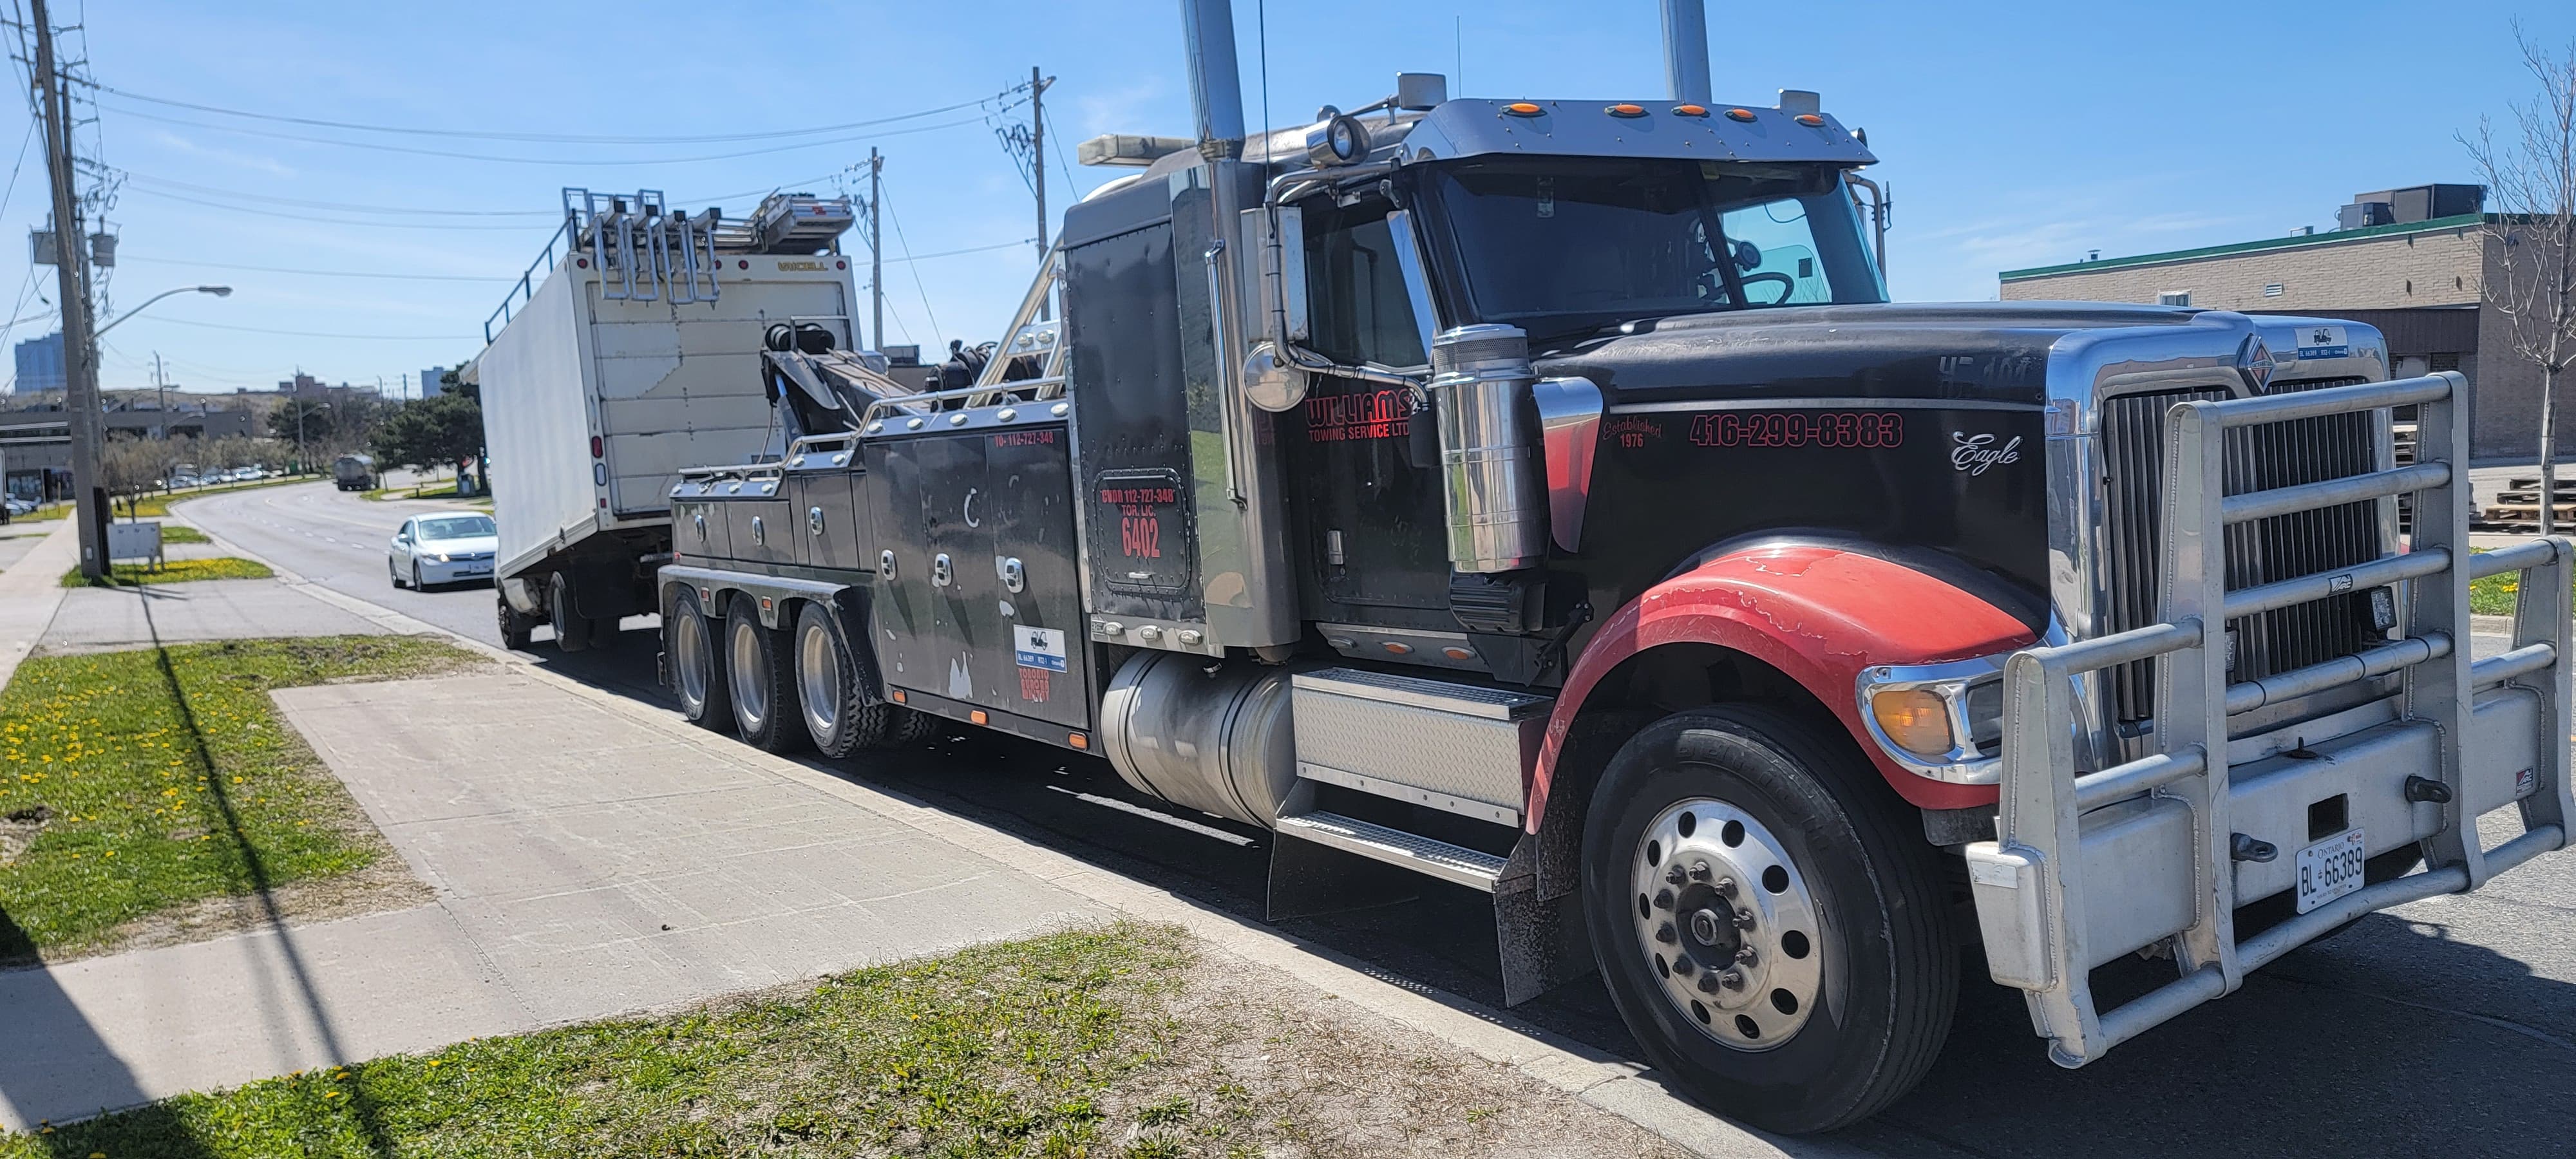 Essential Towing Safety Tips for Drivers in Scarborough, GTA